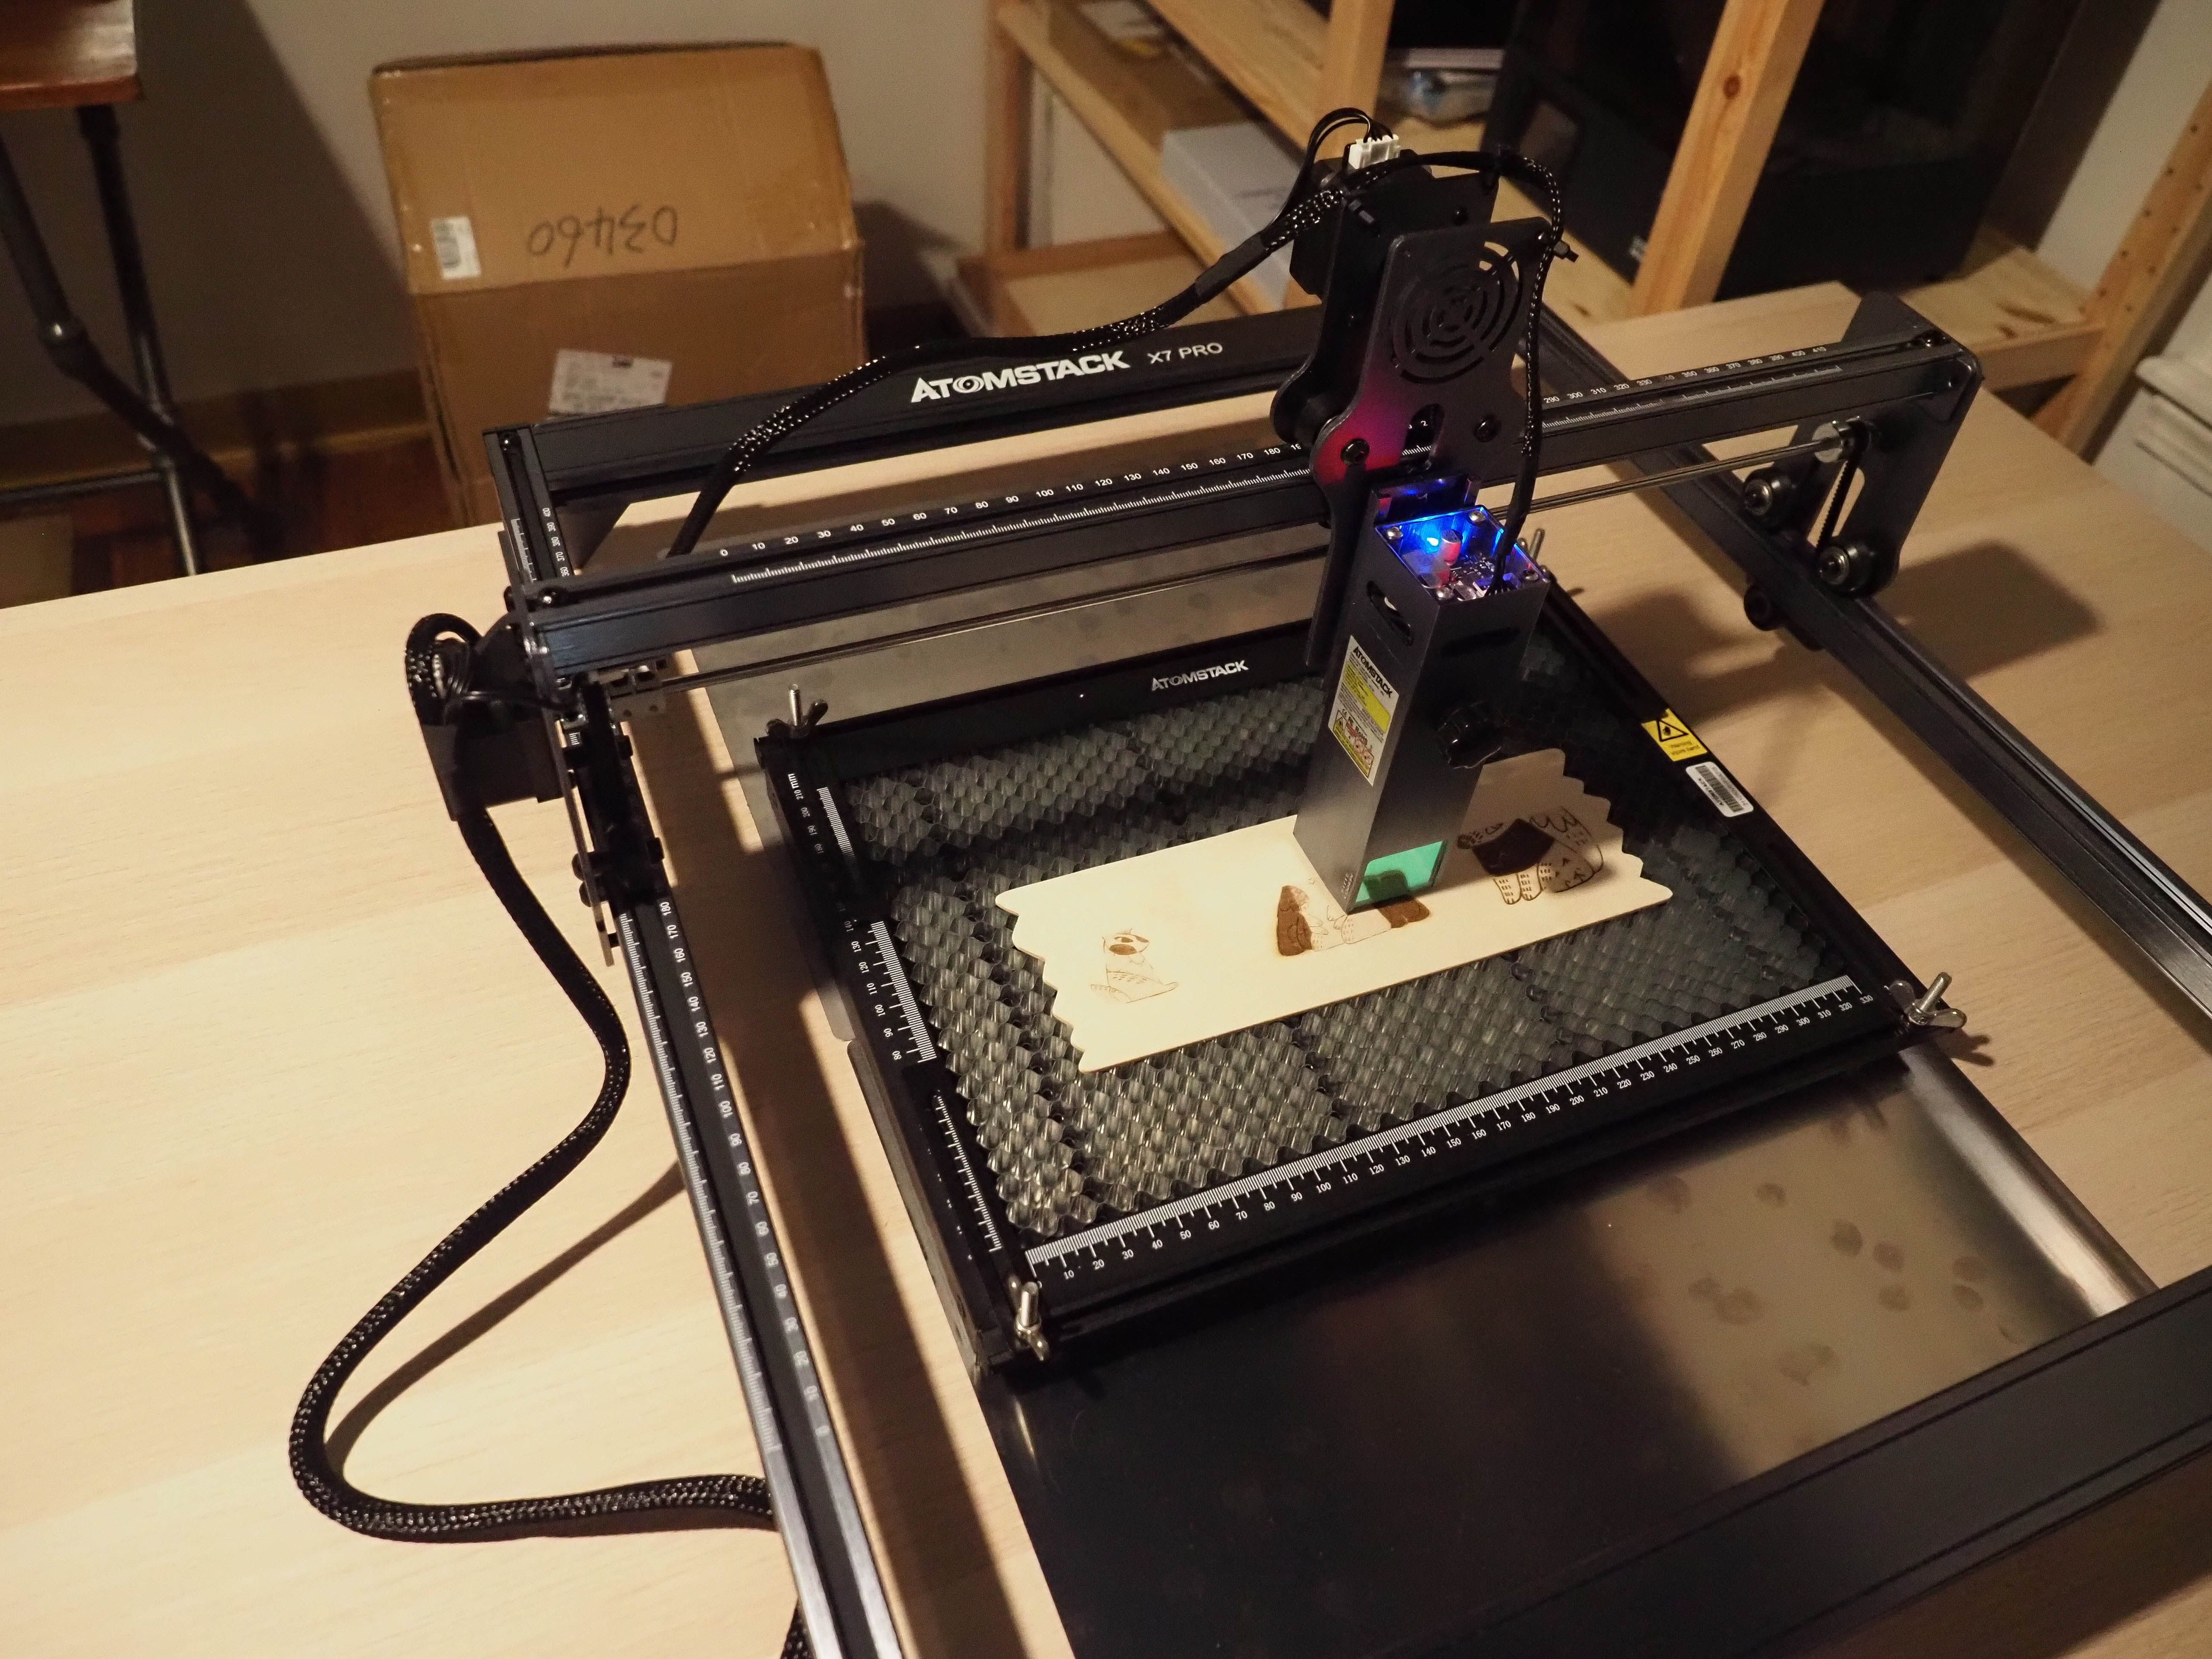 Atomstack X7 Pro Laser Engraver Review A Worthy Addition to Any Maker